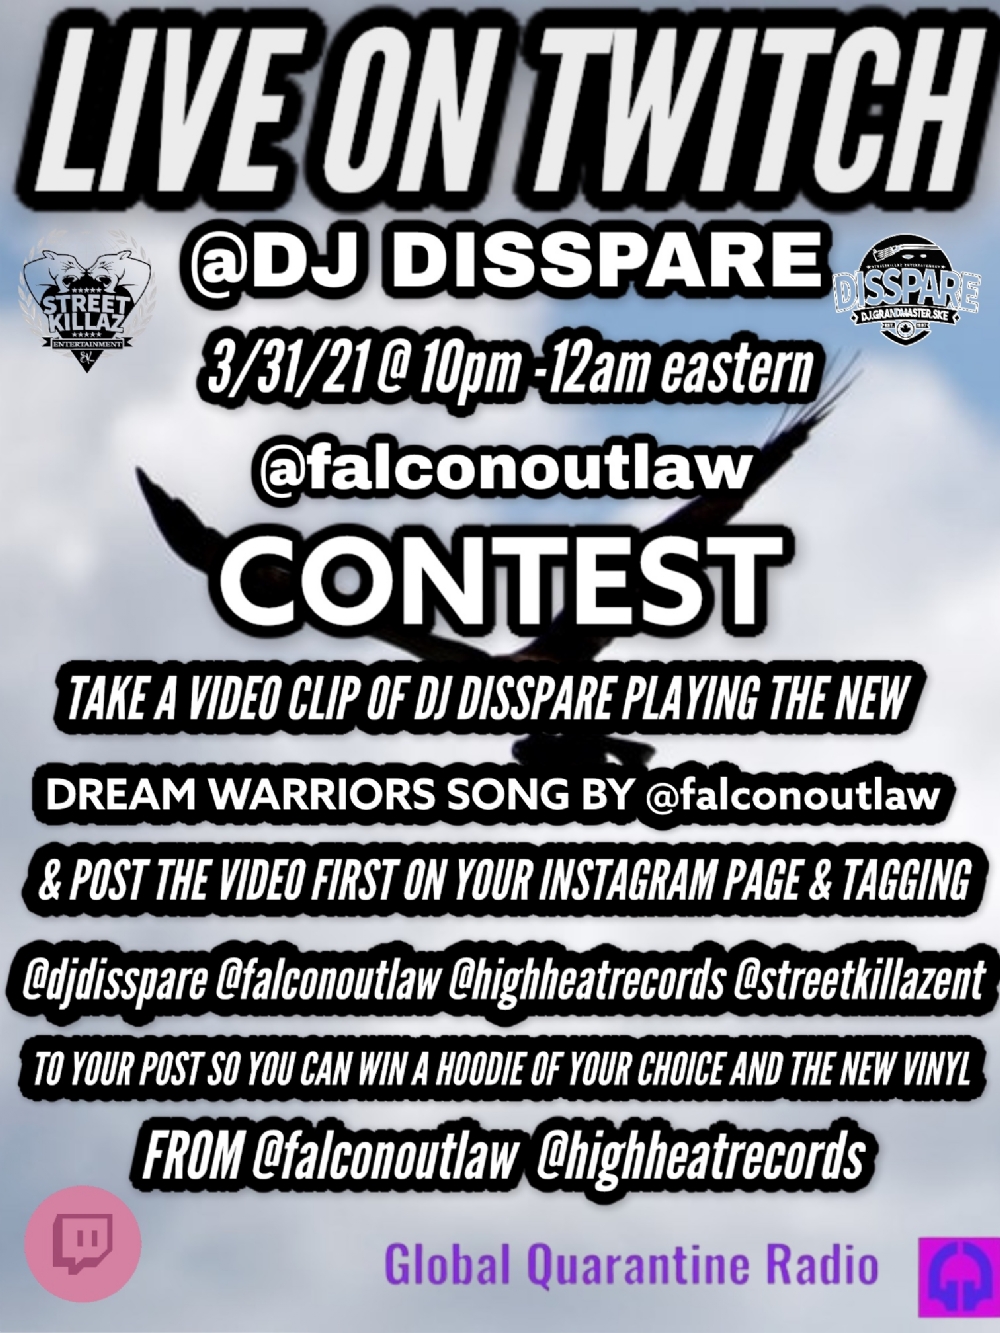 TUNE IN WEDNESDAY @10 pm eastern TO @djdisspare @gqrlive LIVE ON TWITCH